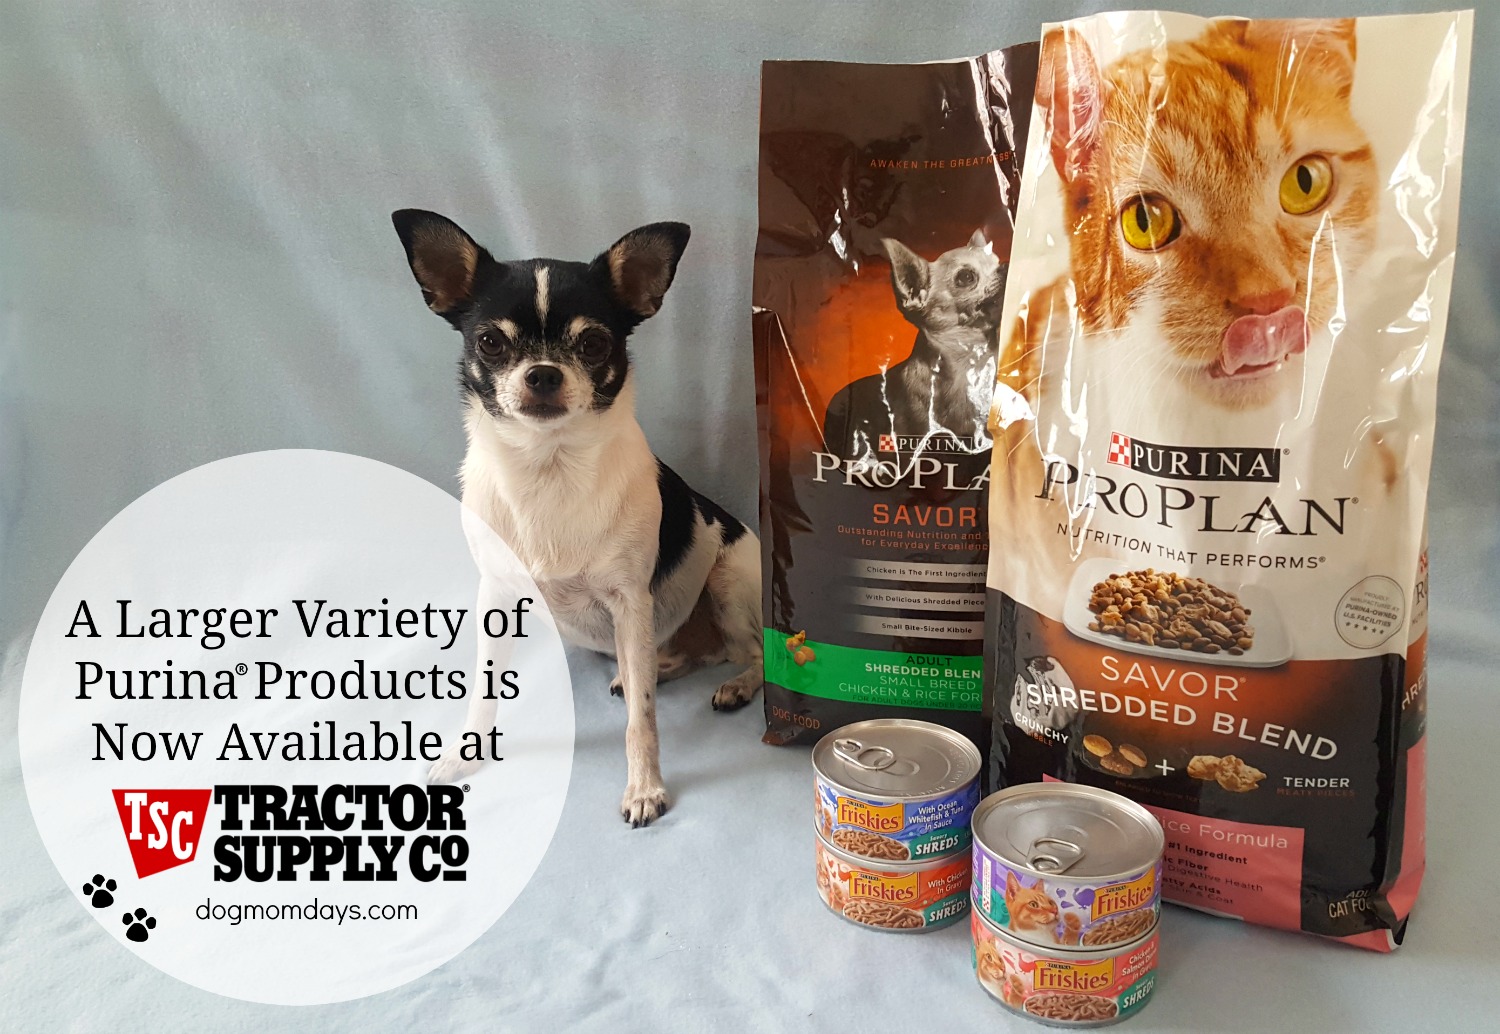 Purina Products available at Tractor Supply